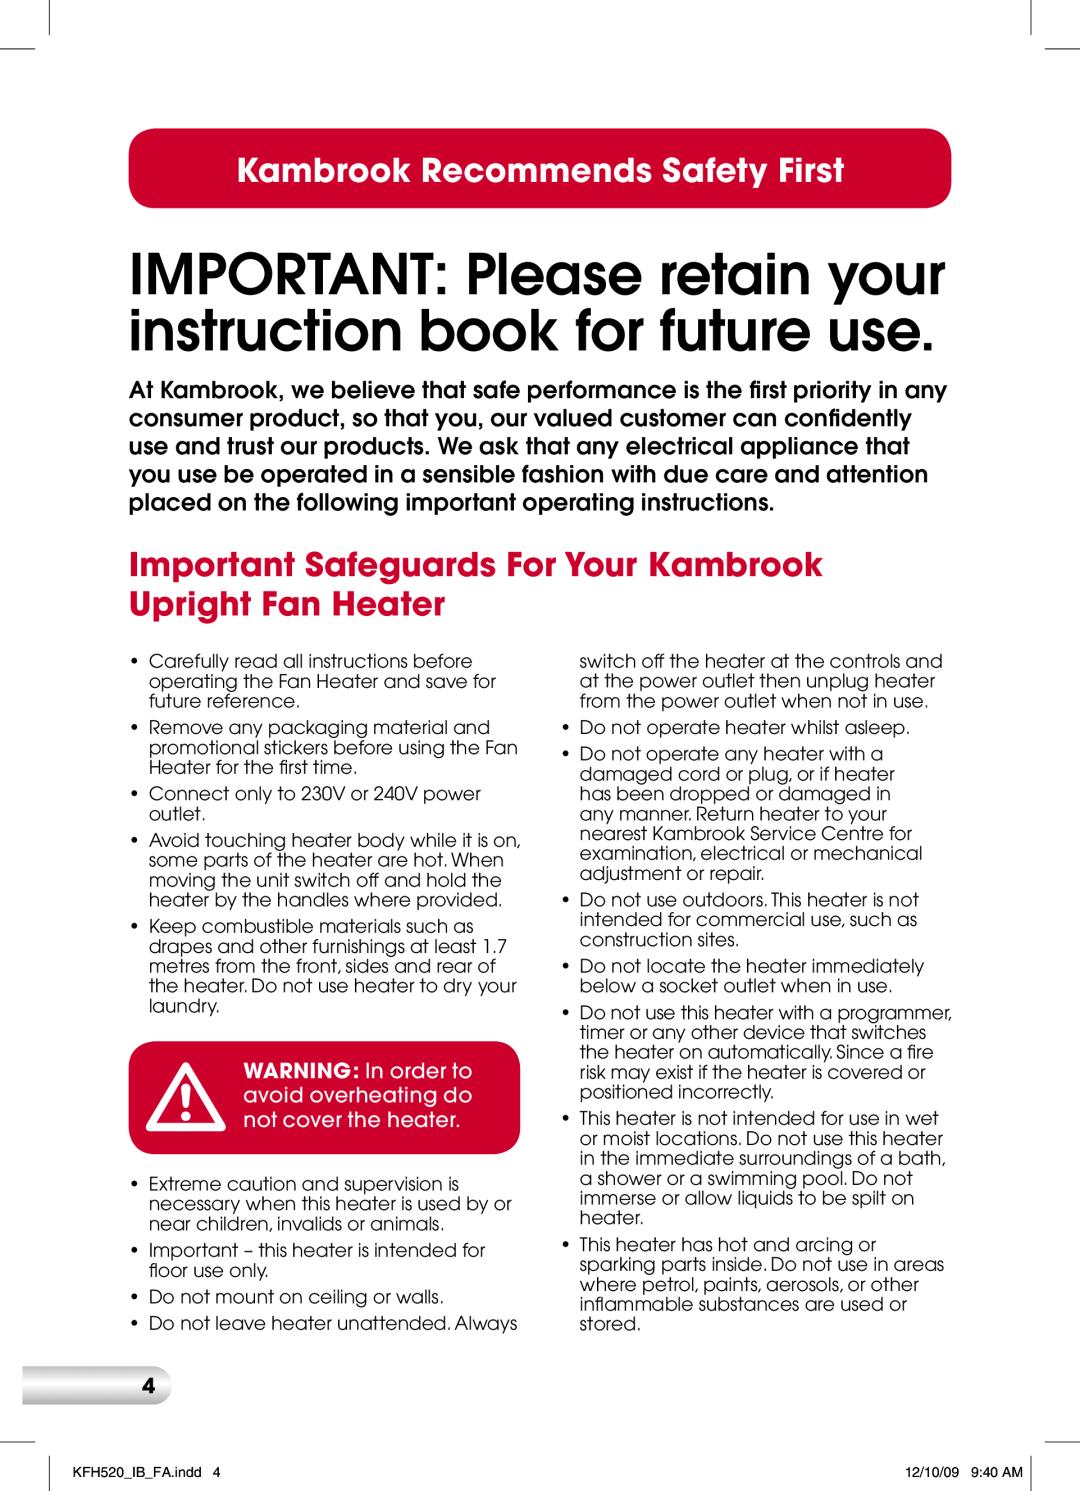 Kambrook KFH520 manual Kambrook Recommends Safety First 